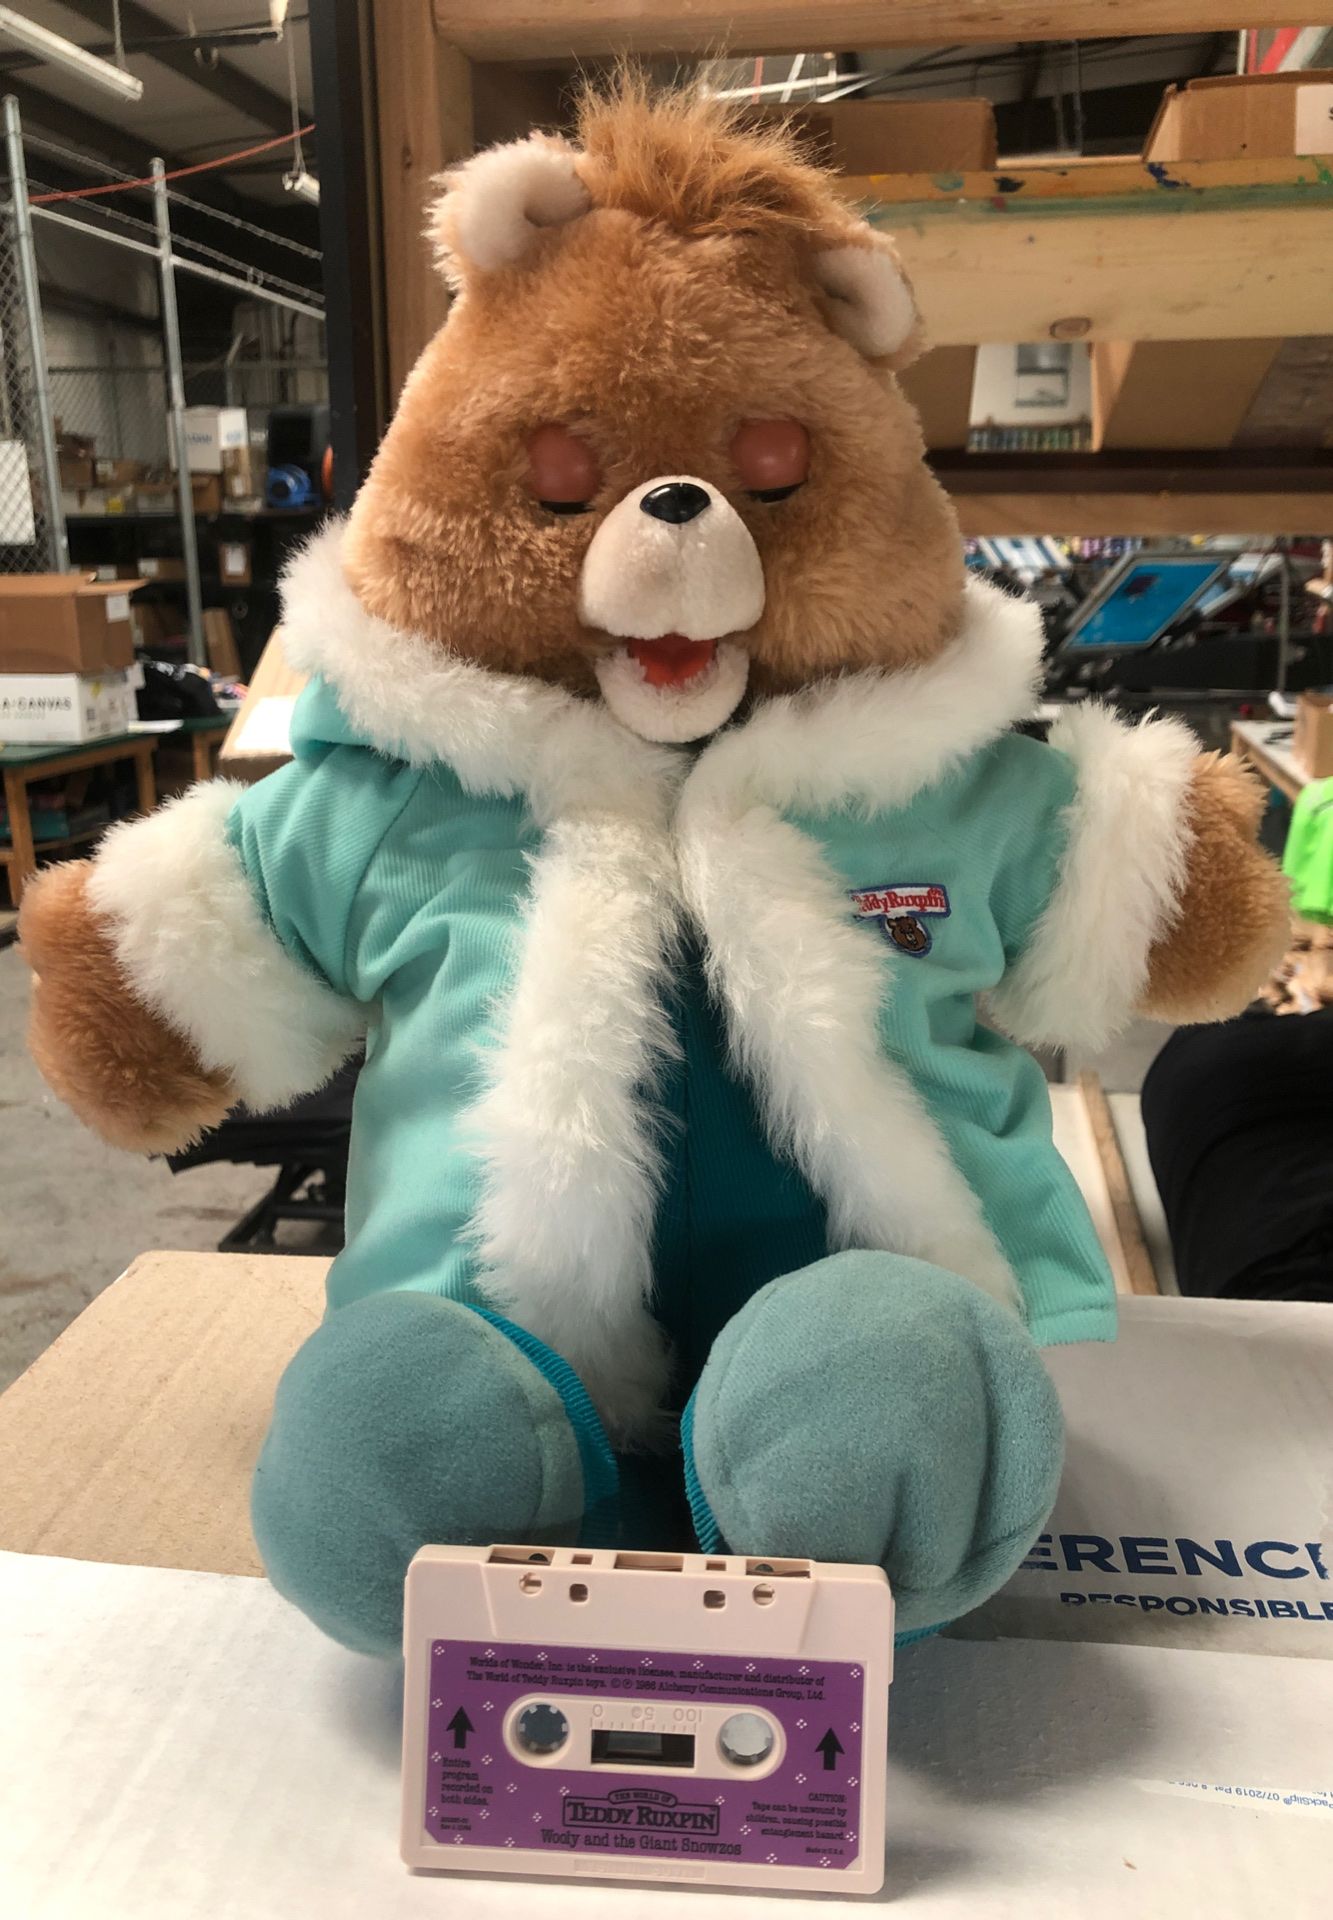 1985 Teddy Ruxpin (doesn’t work) with Arctic clothes and cassette